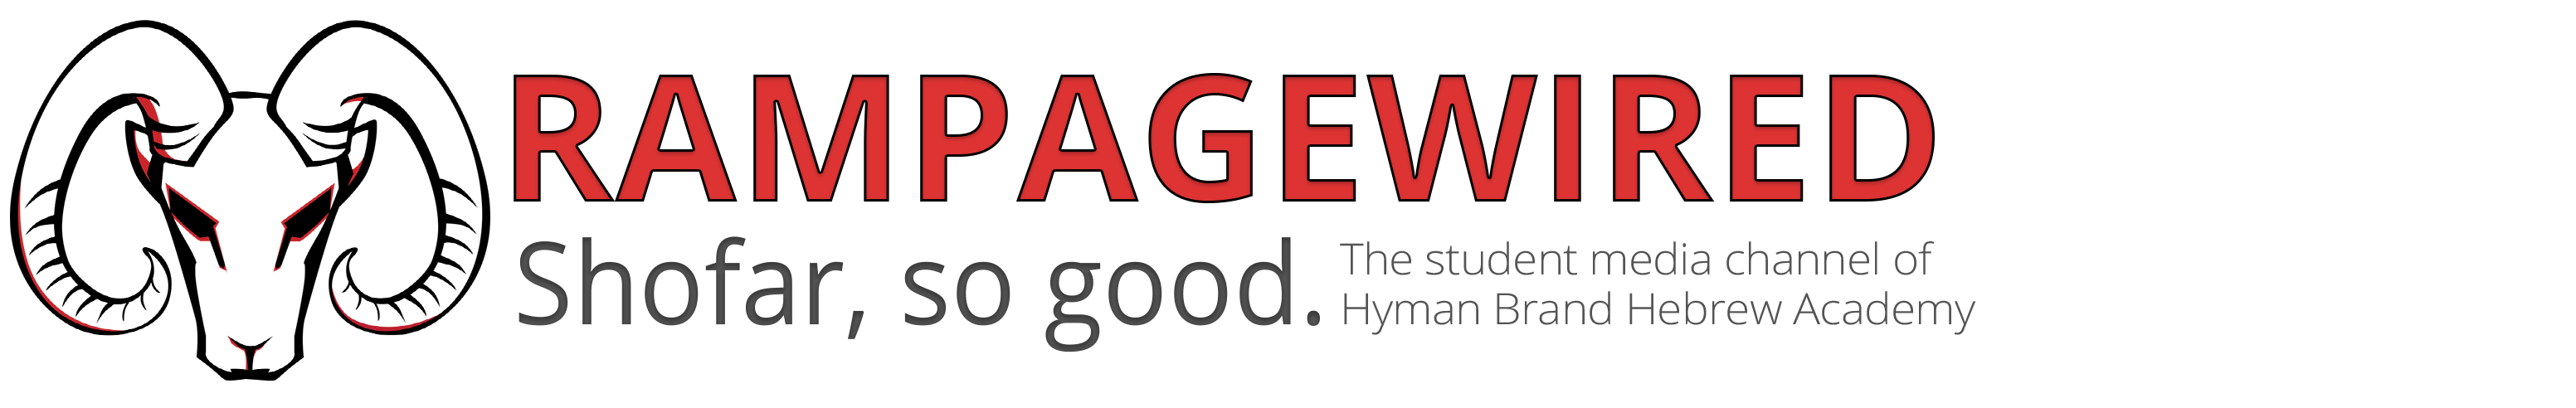 RampageWired: The student media channel of Hyman Brand Hebrew Academy